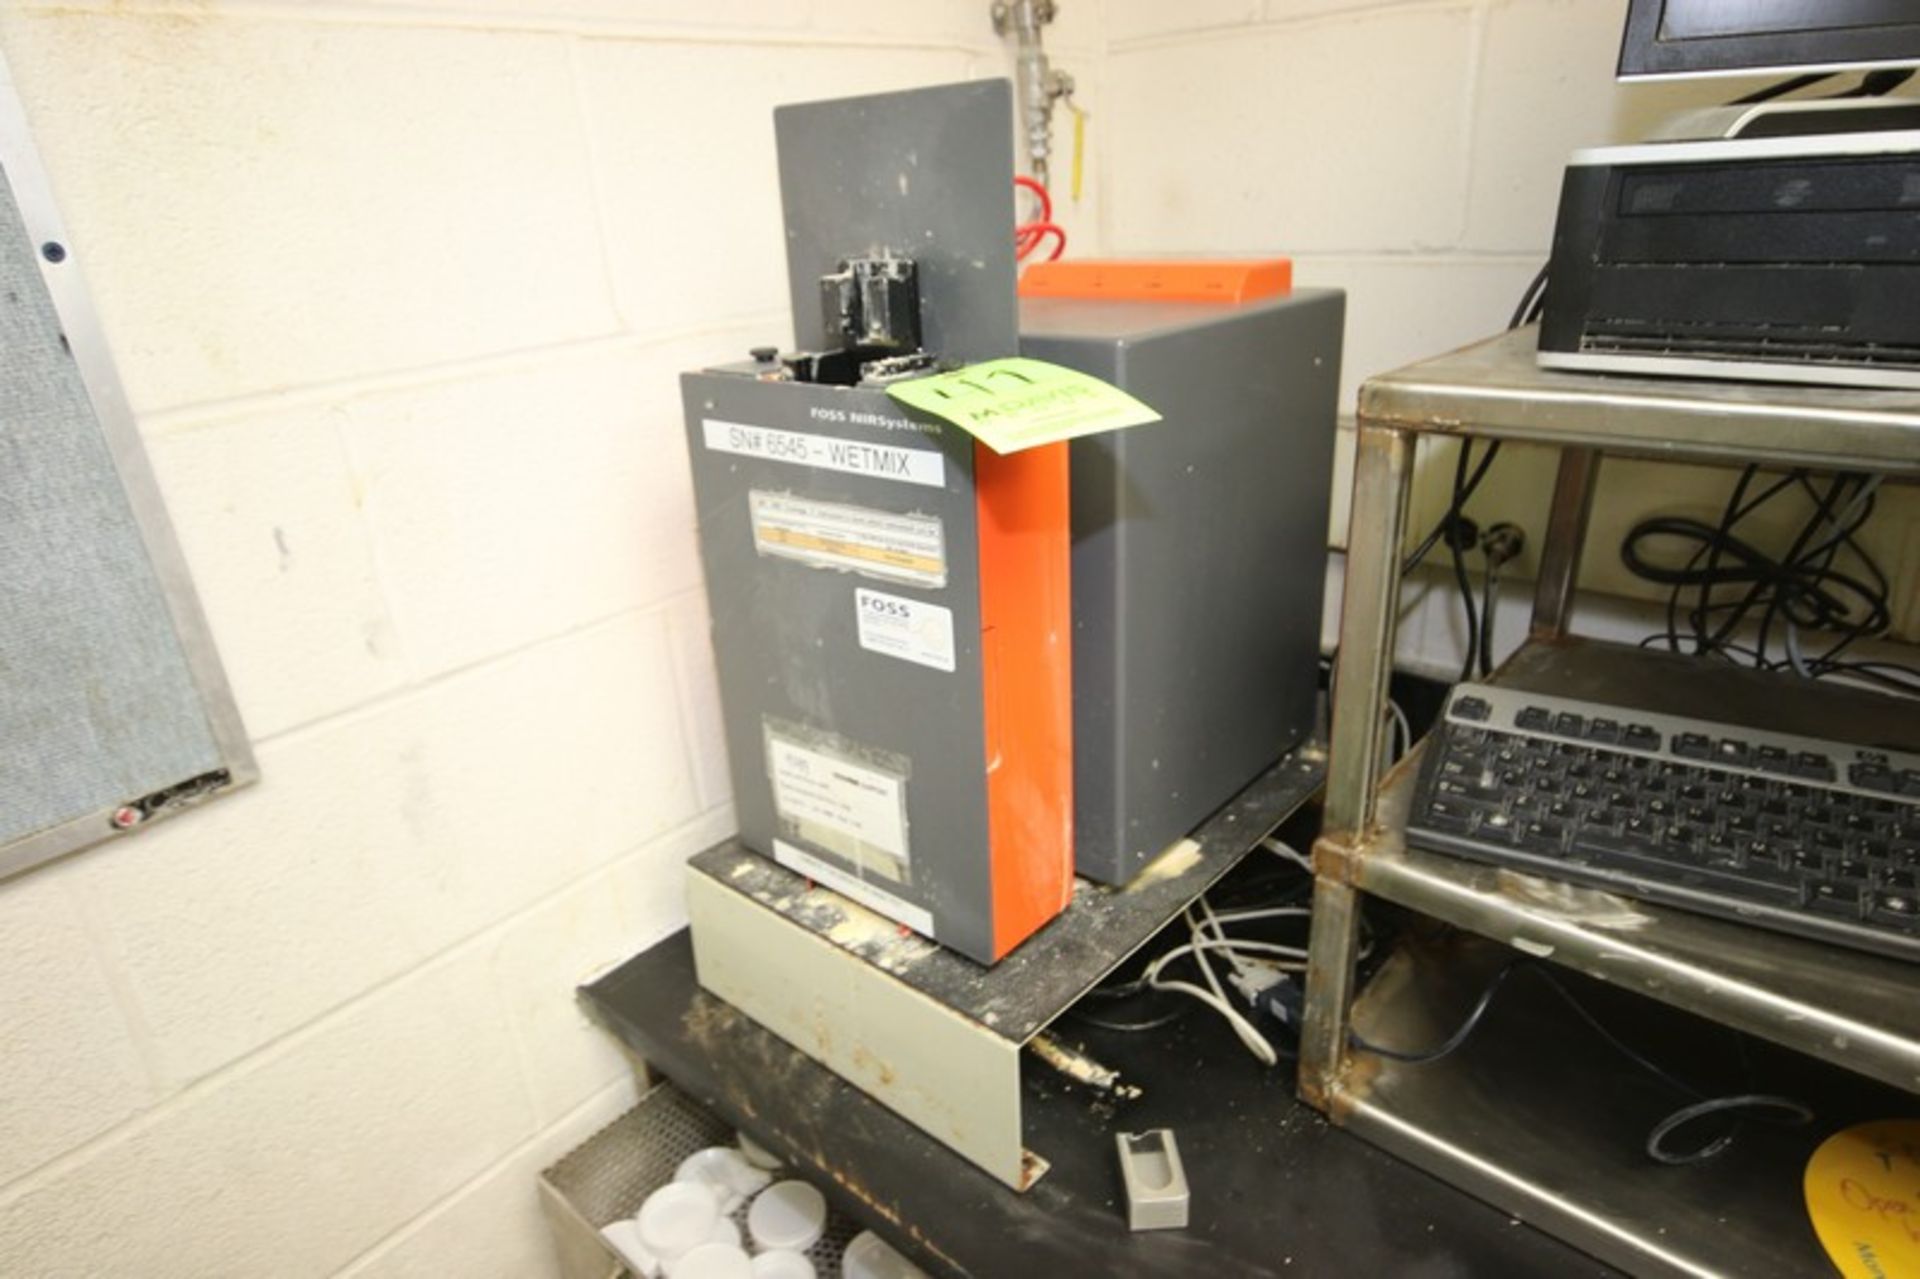 Foss NIRSystems Analyzer, M/N 6500-M, S/N 6545, 100-240 Volts (INV#82385)(LOCATED @ MDG AUCTION